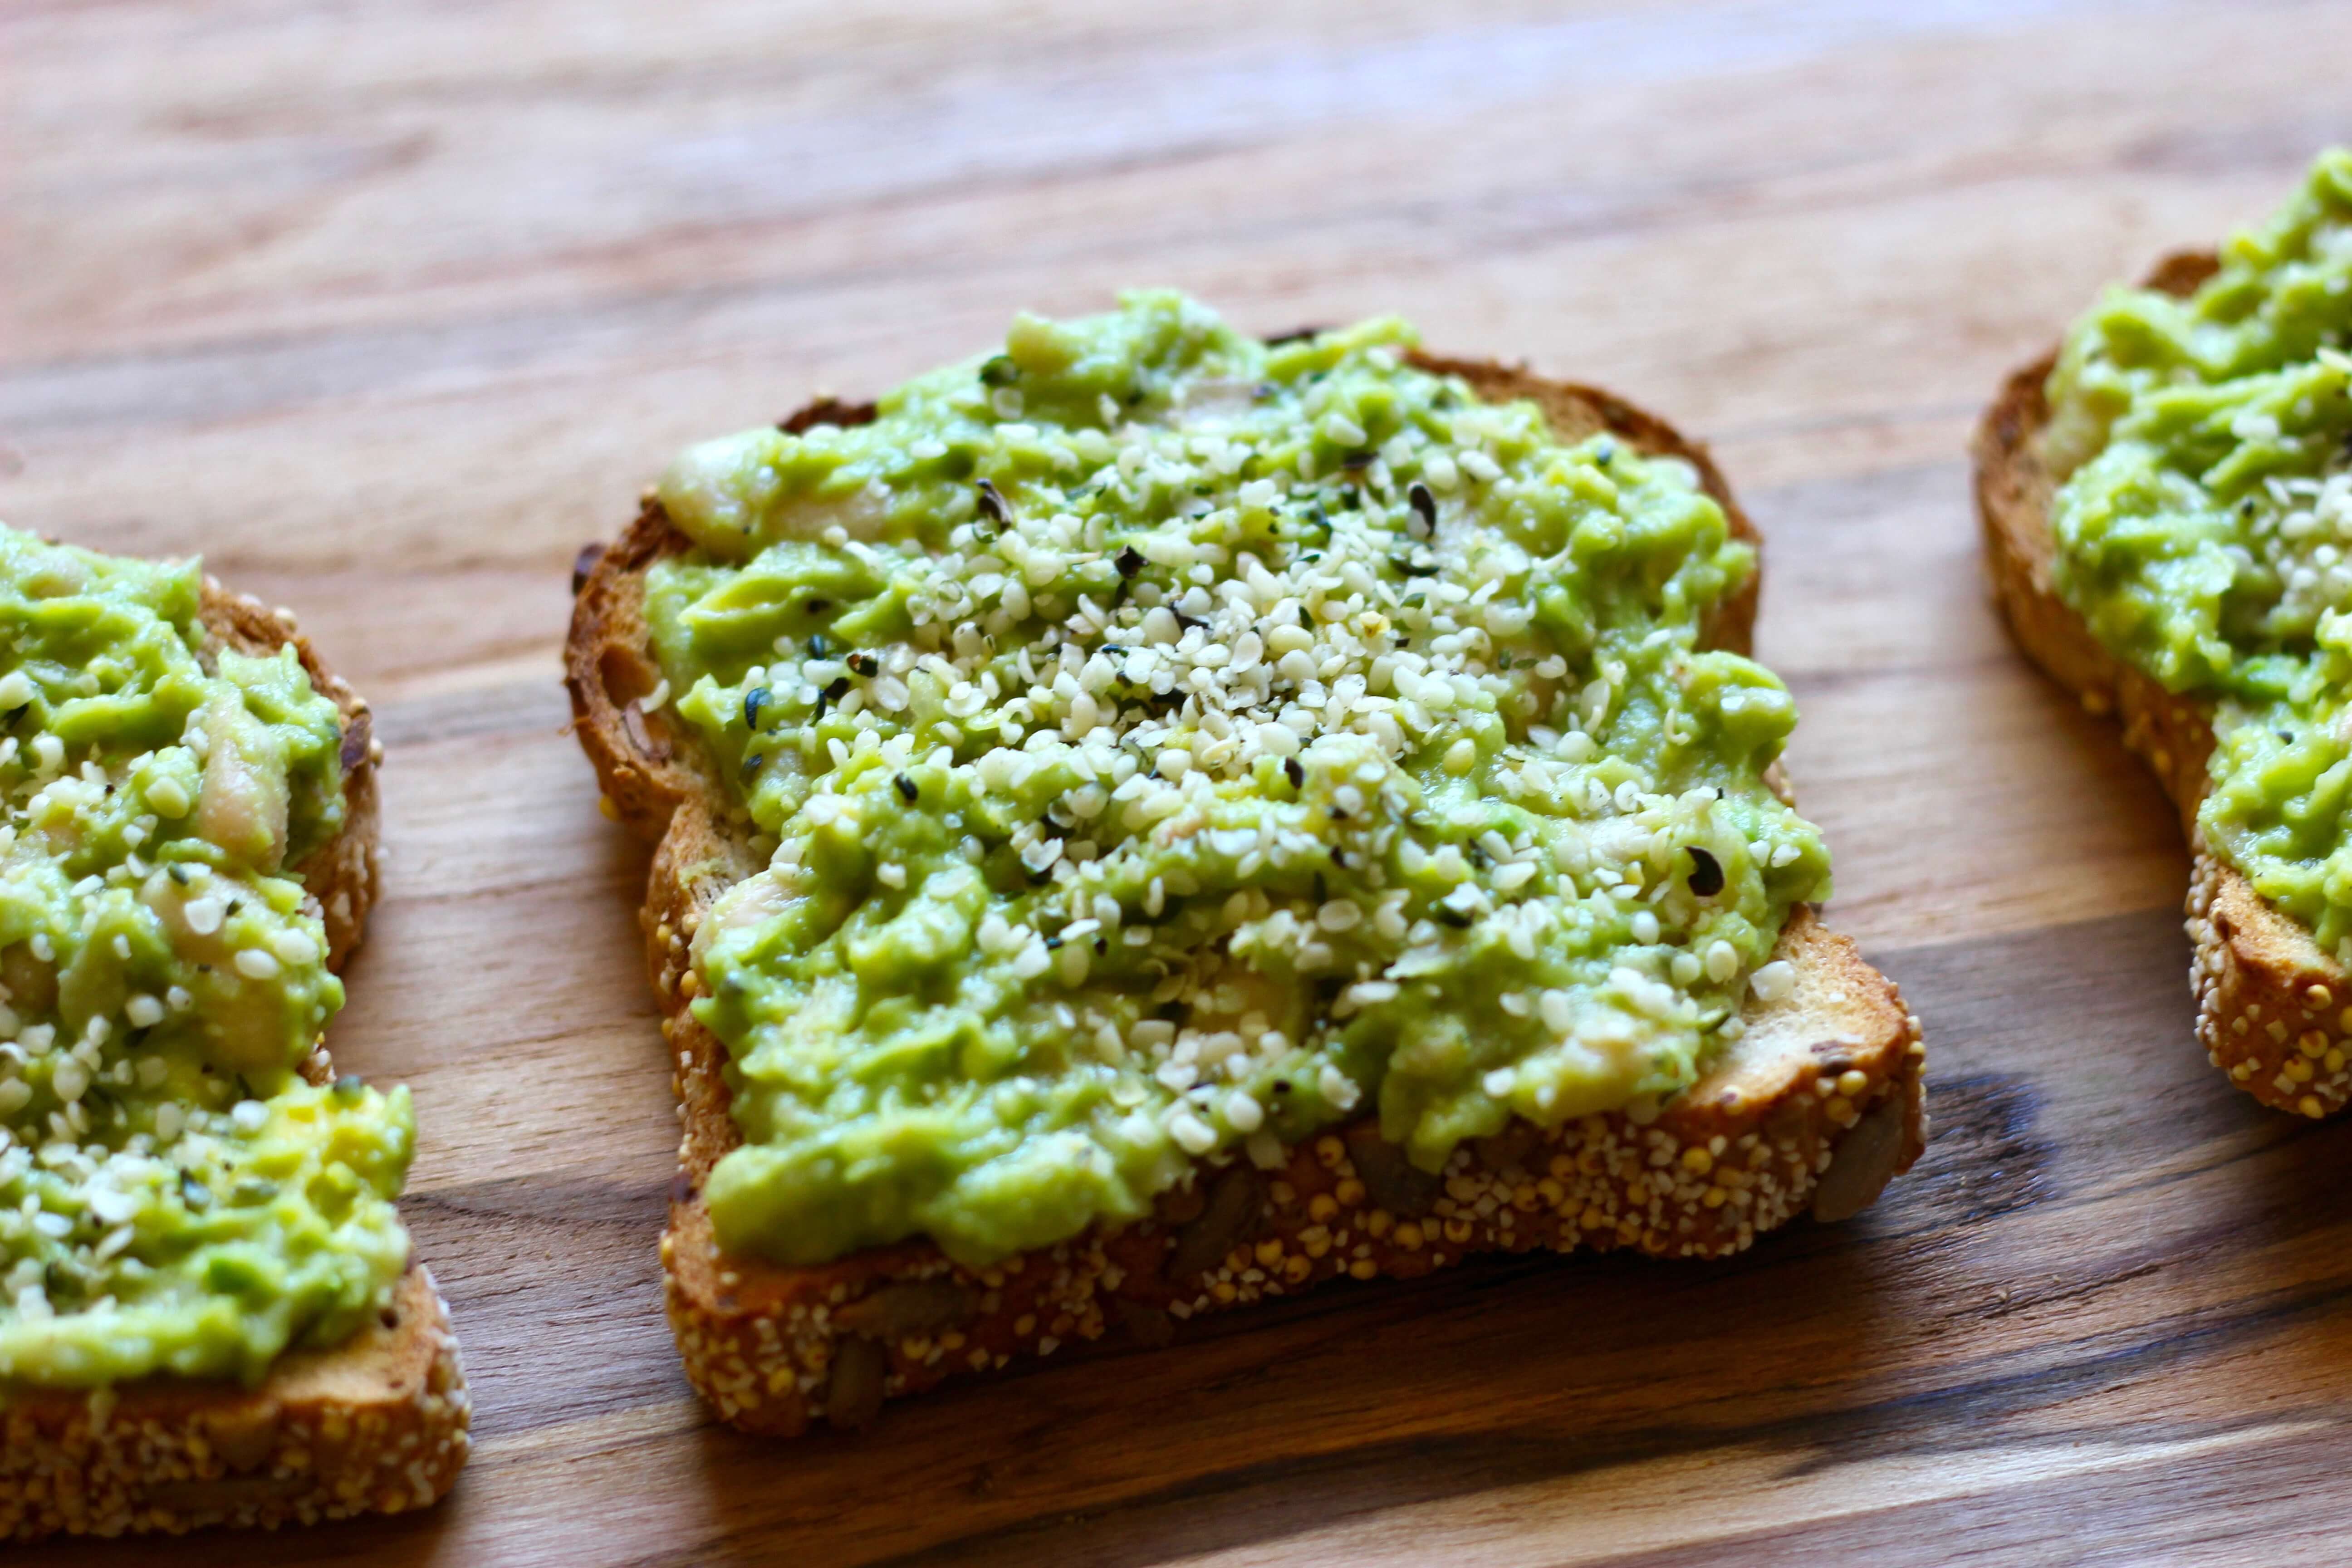 20 Meal Ideas to Help Clients with Eczema: Protein-Packed Avocado Toast